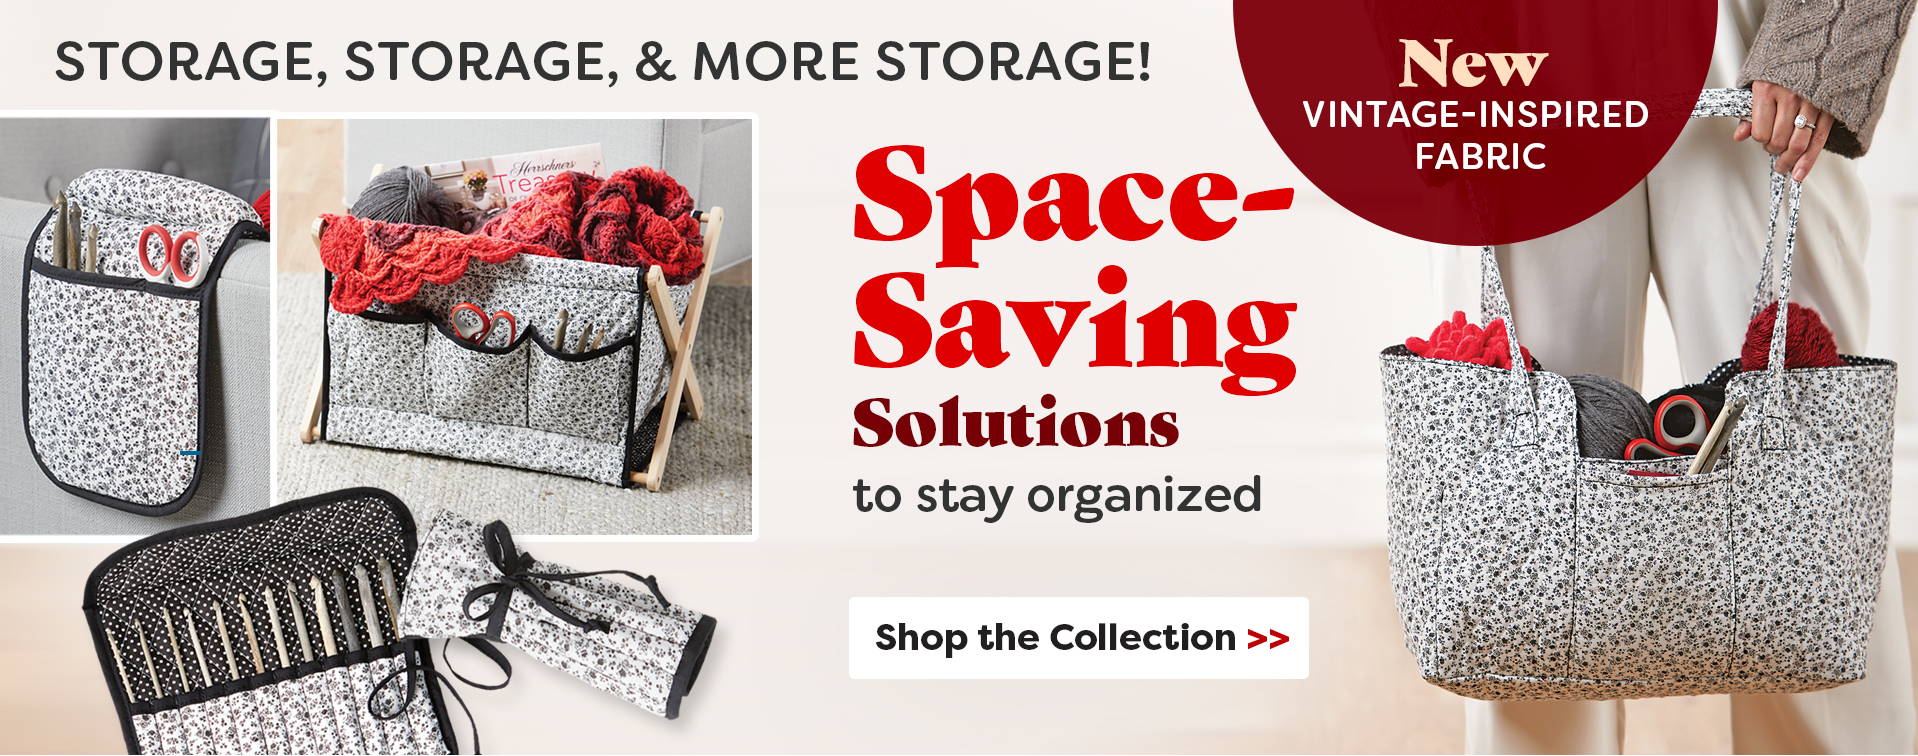 Storage, Storage, and More Sorage. Space-savings solutions to say organized. Shop the Collection